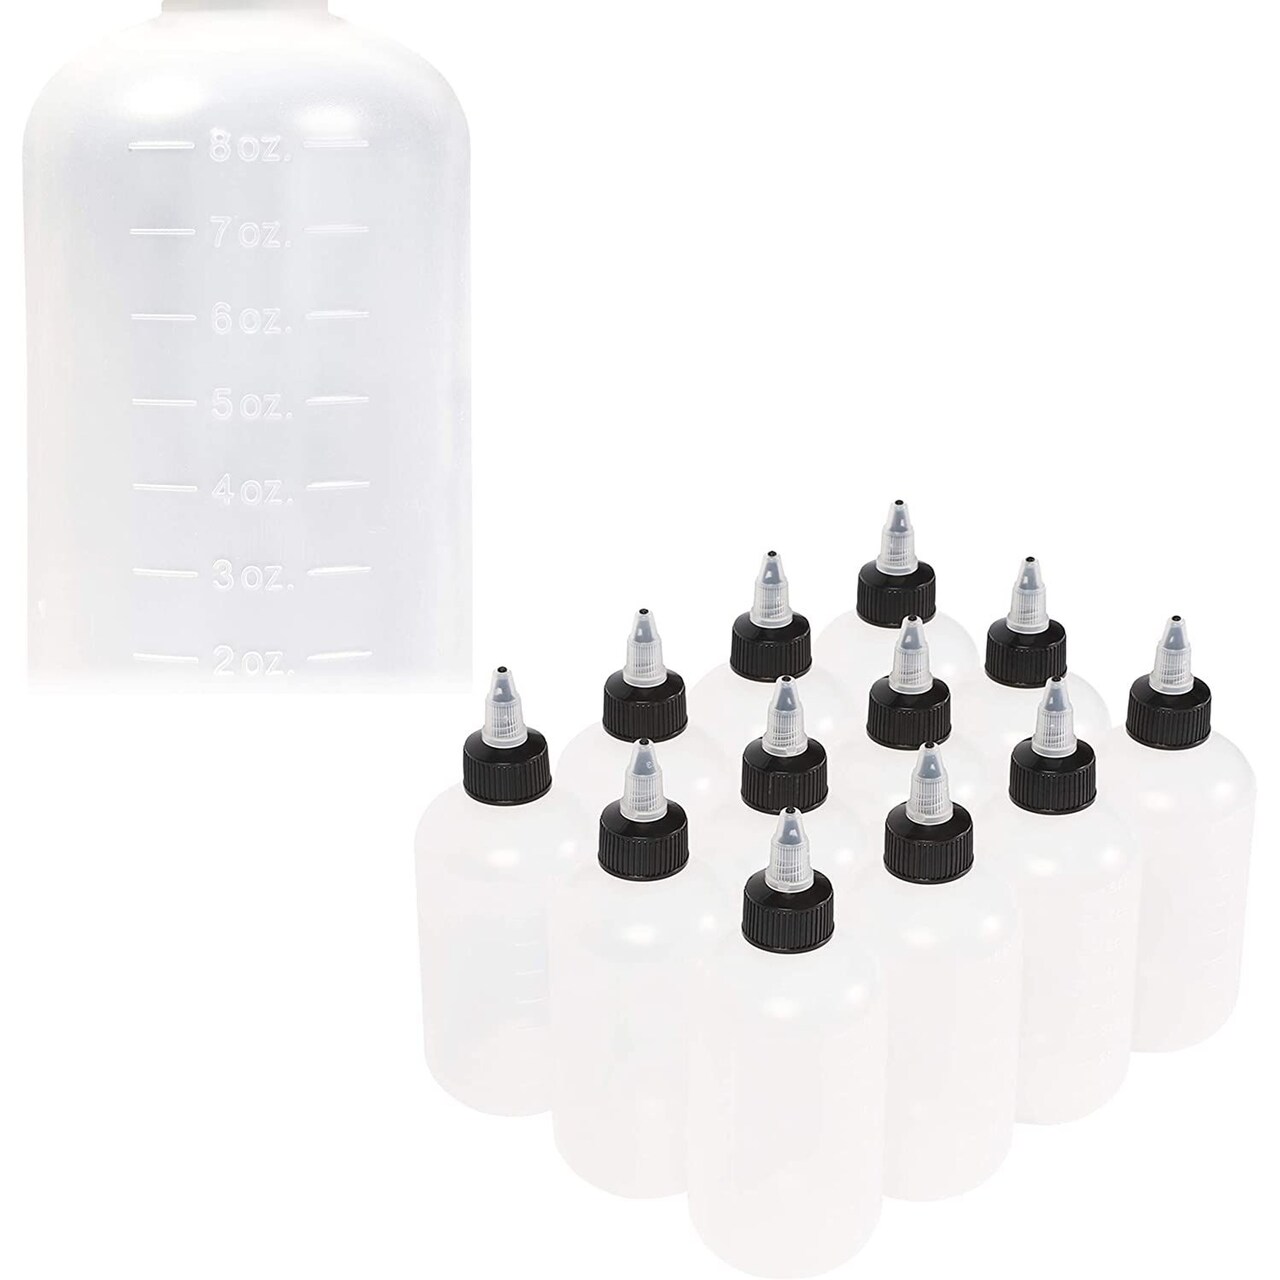 Boston Round Squeeze Bottles with Twist Caps (8 oz, White, 12 Pack)